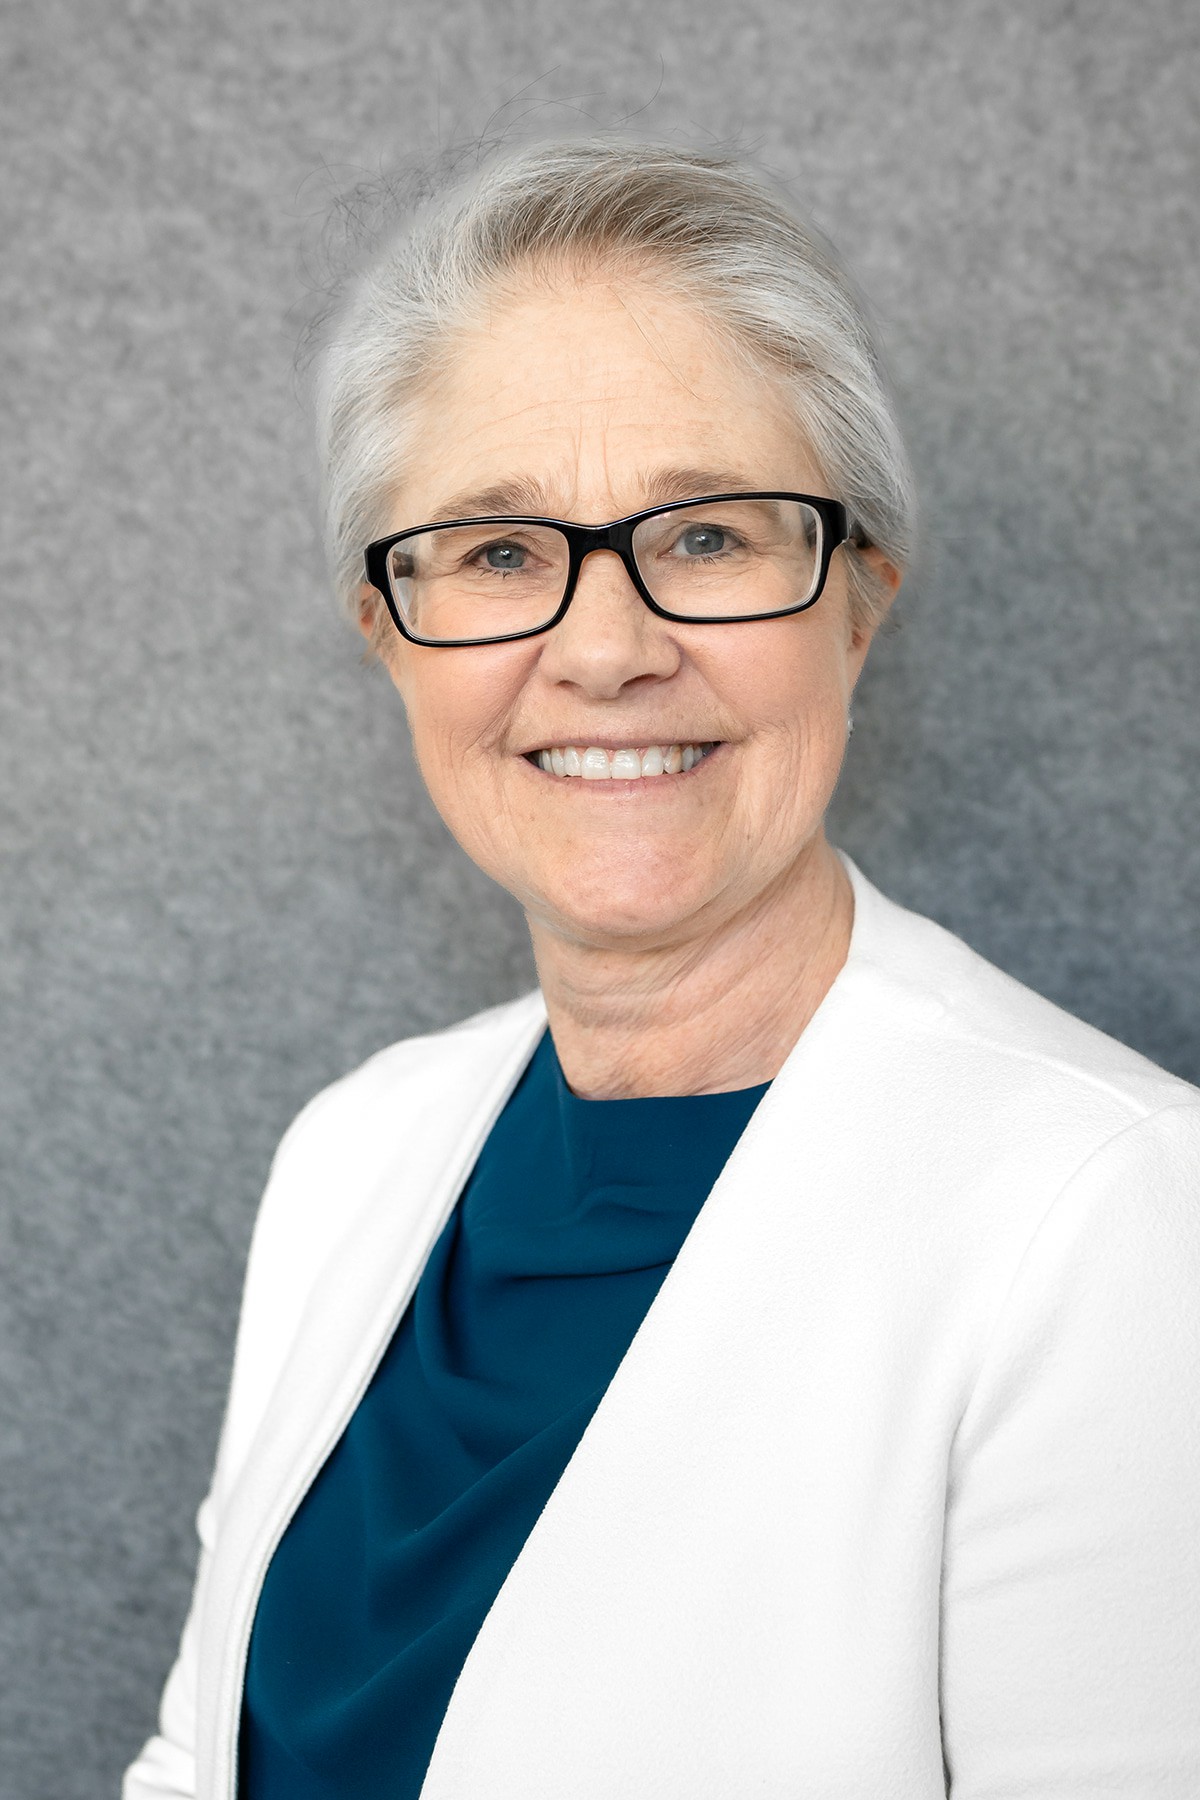 Photograph of Managing Director Charmaine Quick